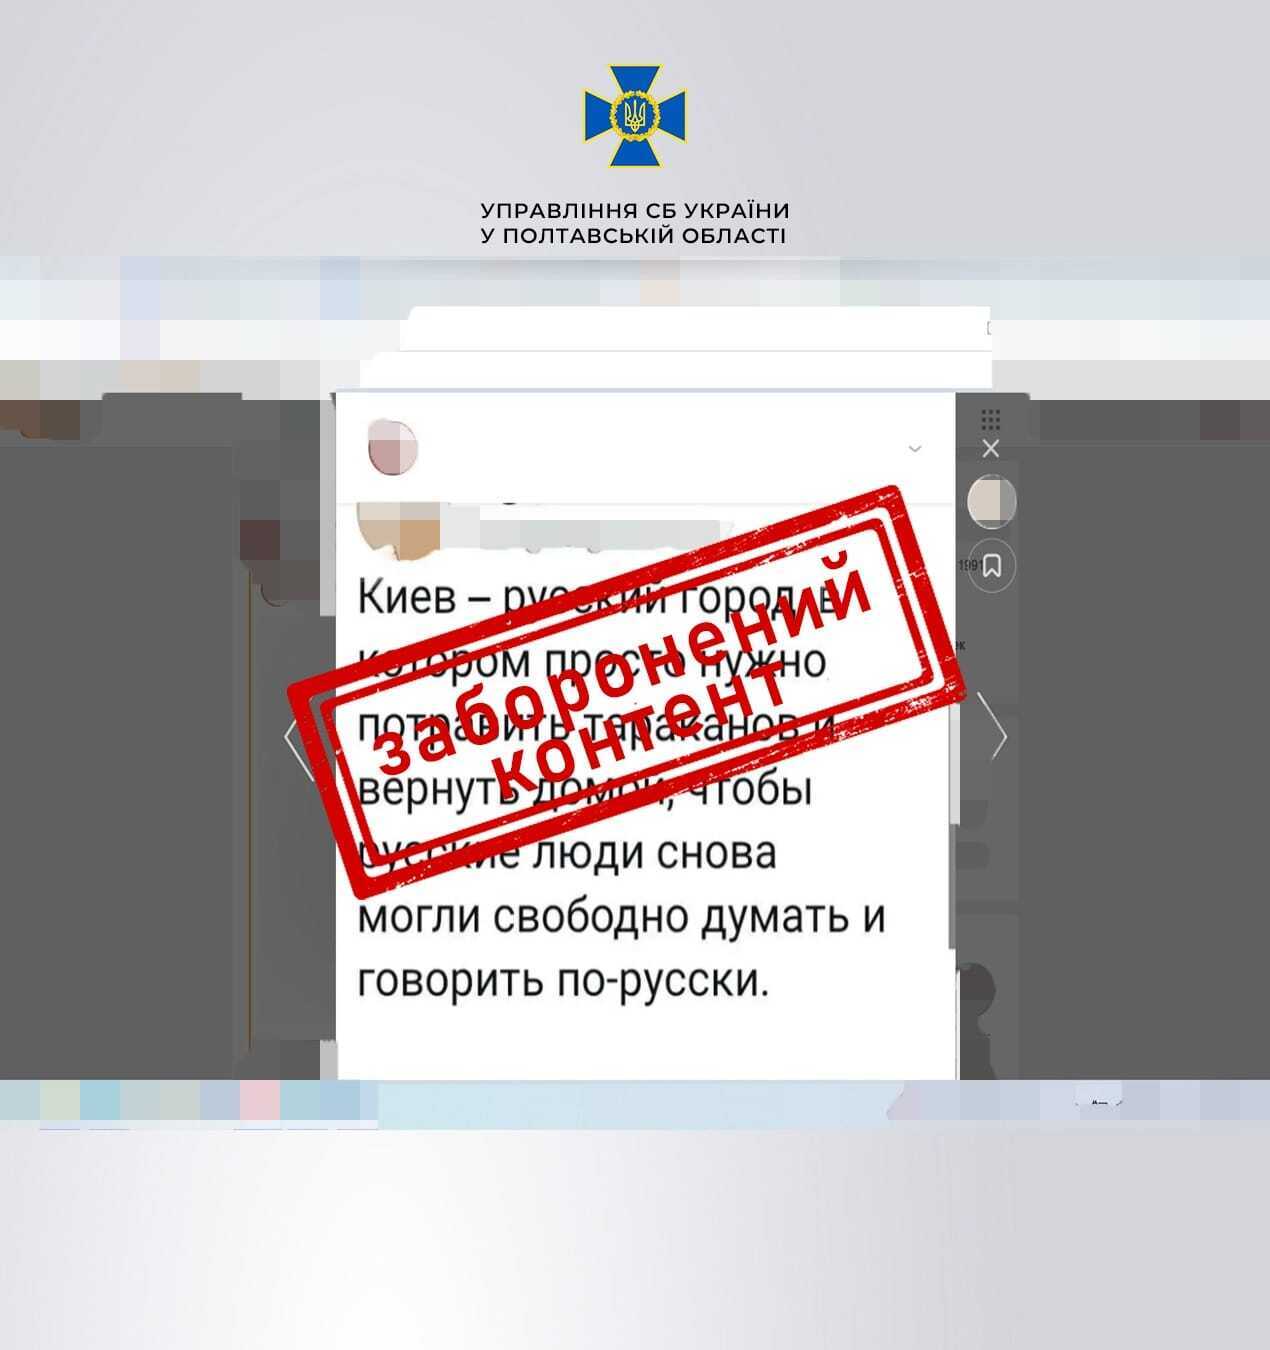 Called for the partition of Ukraine and called Kyiv a ''Russian city'': a Putin supporter was exposed in Poltava region. Photo